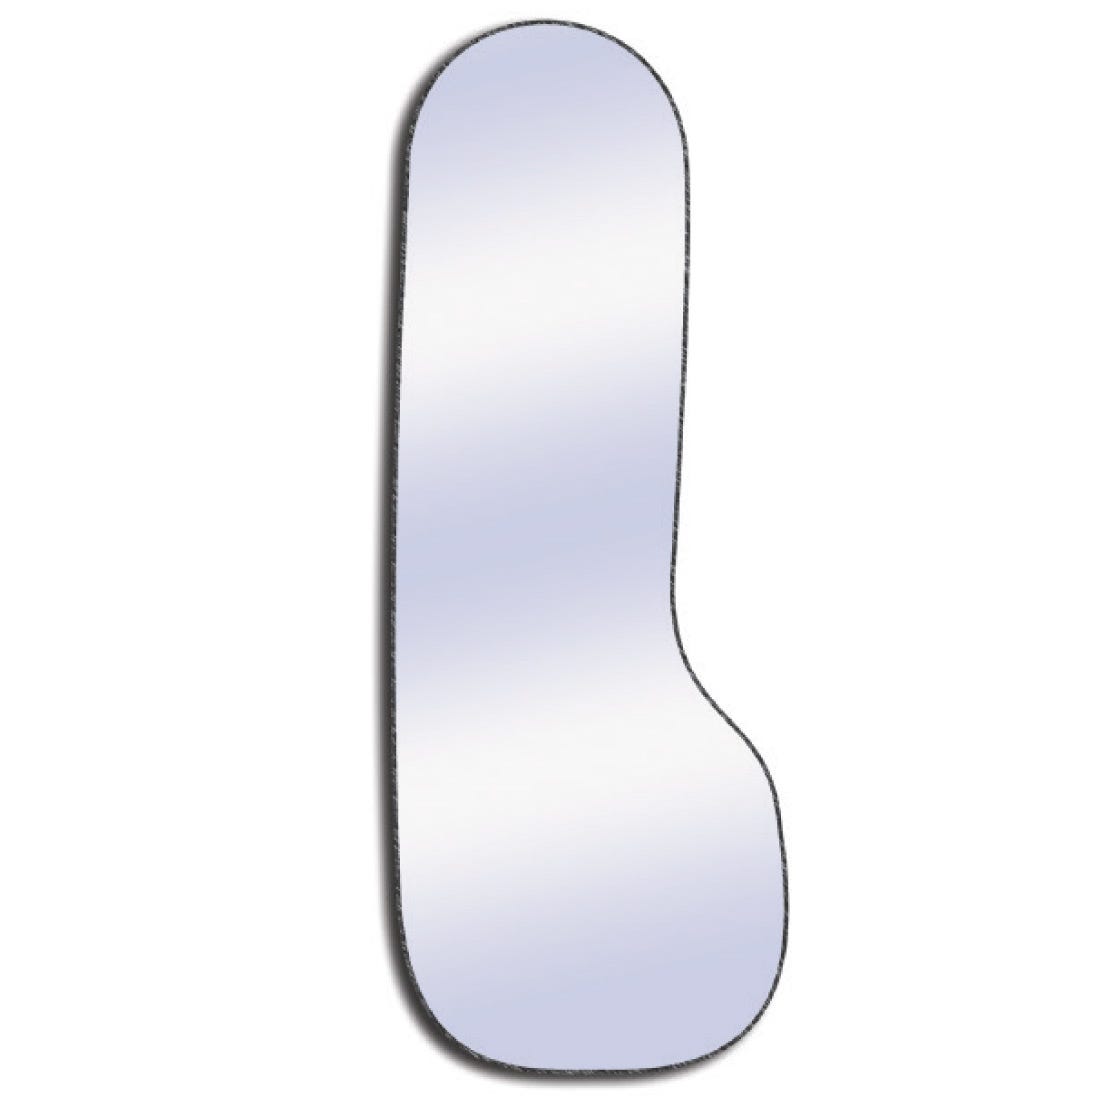 ACE Lingual Intraoral Photo Mirror - Adult #1 -double sided